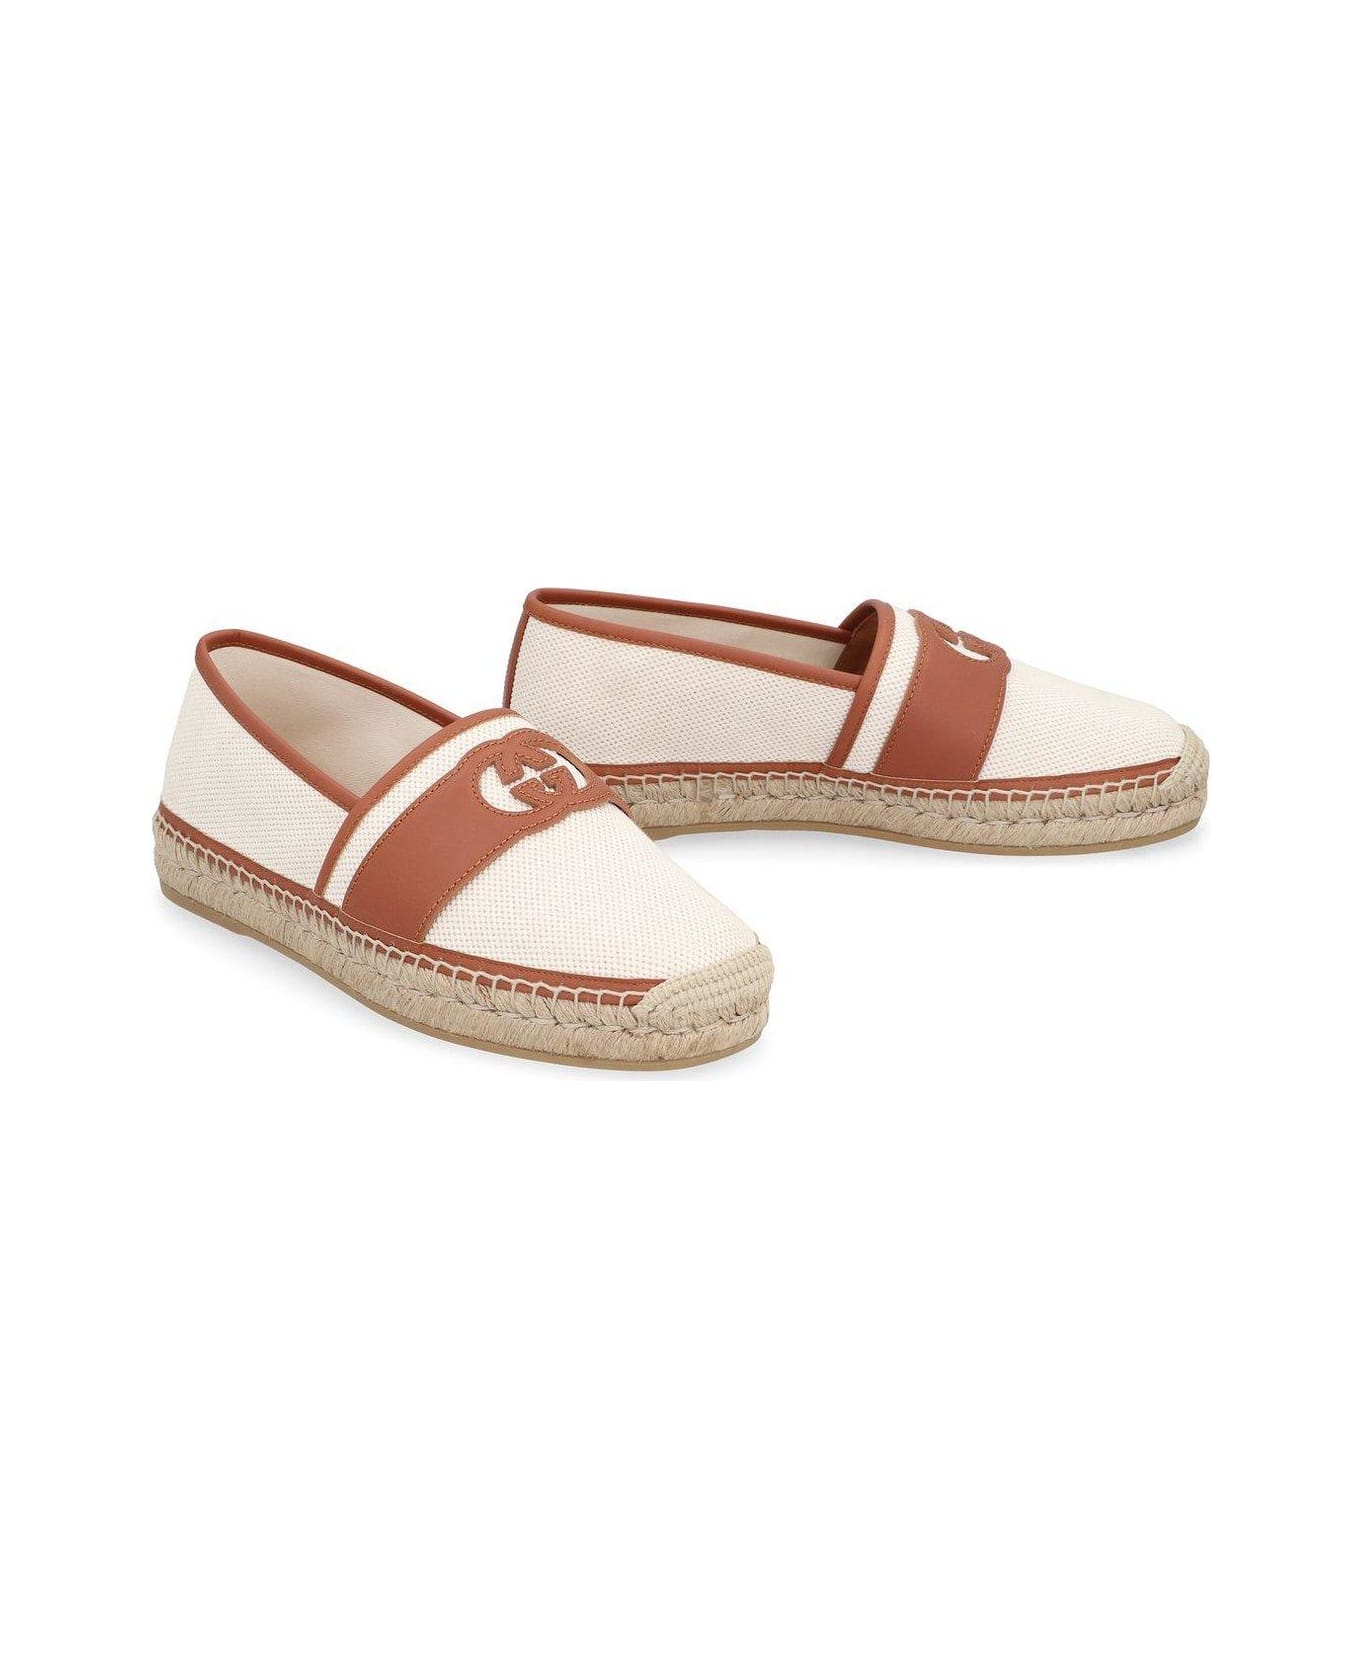 Gucci Logo Cut-out Slip-on Espadrilles - BEINATURALHARNBRO その他各種シューズ